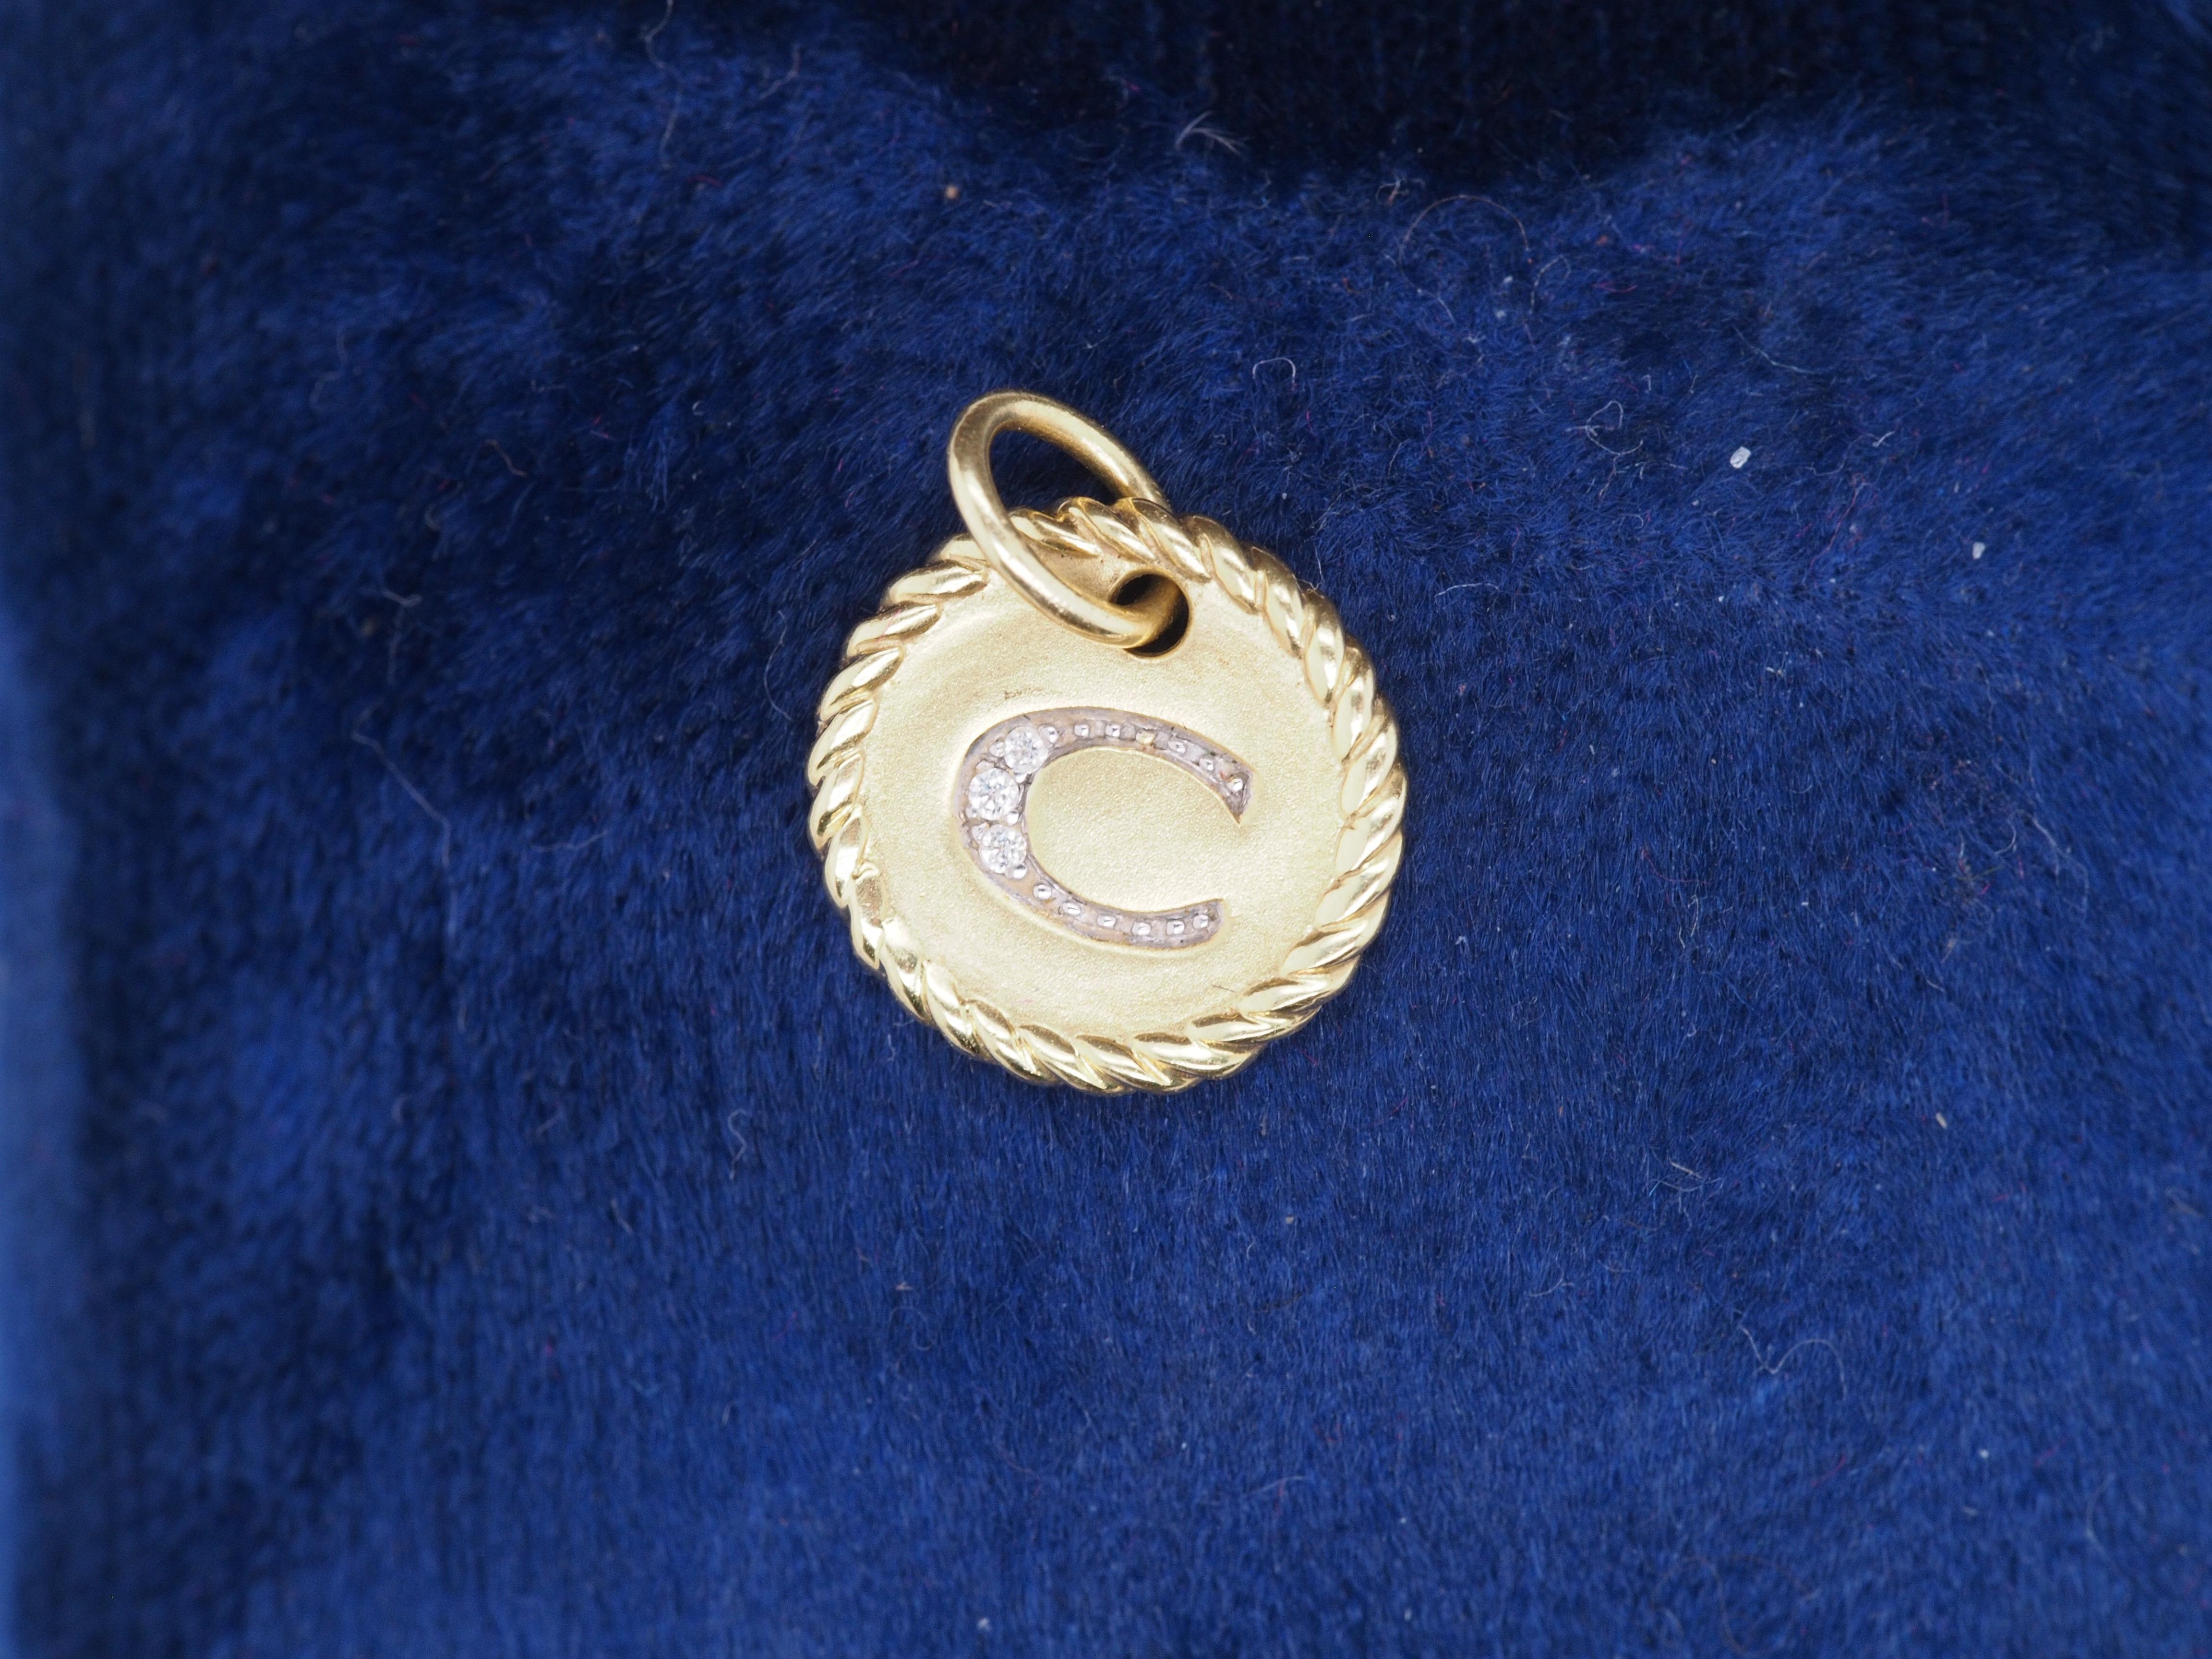 Year: 2000s
Item Details:
Metal Type: 18K Yellow Gold [Hallmarked, and Tested]
Weight: 1.2 grams
Measurement: 0.5 inch long
Condition: Excellent
Price: $400
Payment & Refund Details:
More Pictures Available on Request
Payment via